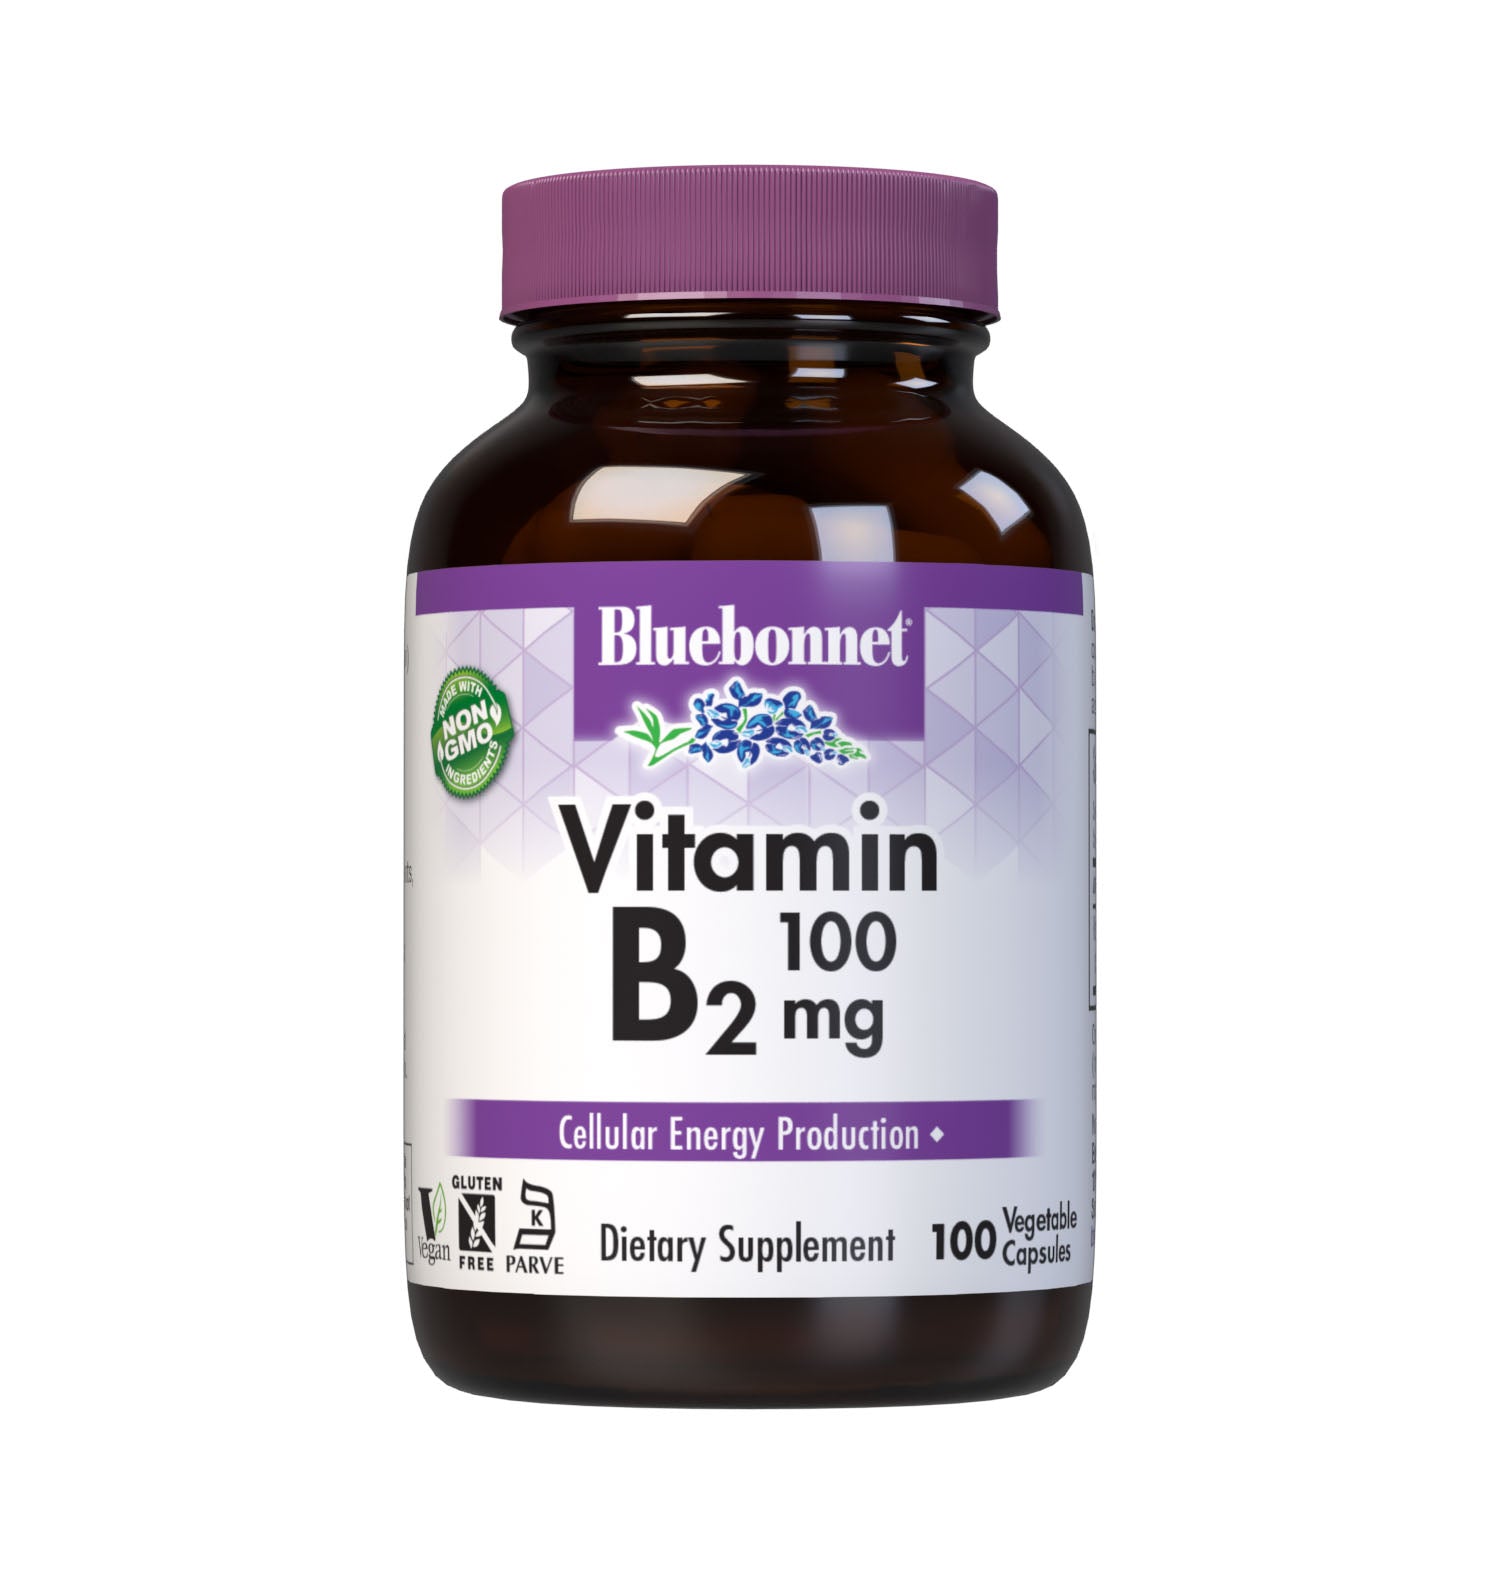 Bluebonnet’s Vitamin B2 100 mg Vegetable Capsules are formulated with vitamin B2 (riboflavin) in its crystalline form, which supports cellular energy production. #size_100 count